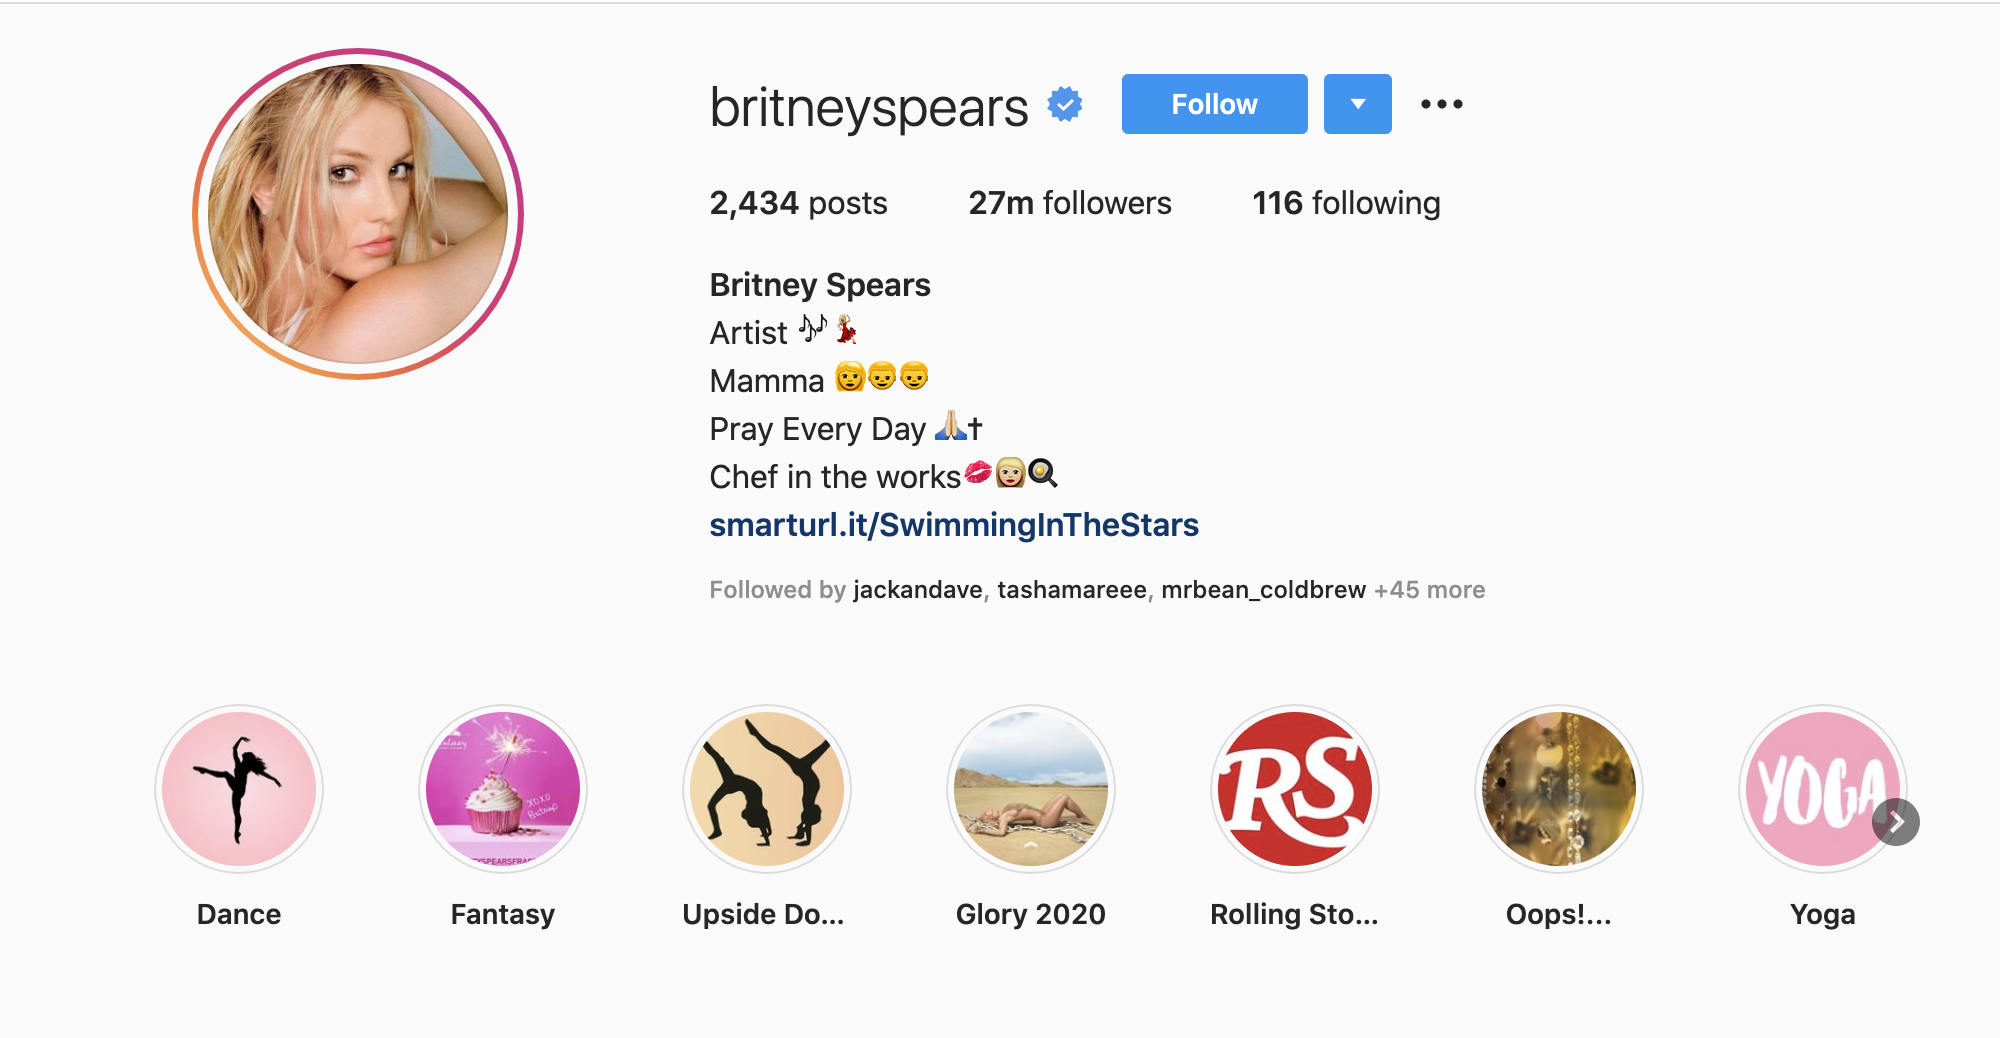 Britney_Spears_Drops_New_Song_Celebrates_39th_Birthday_Insta_Bio.png